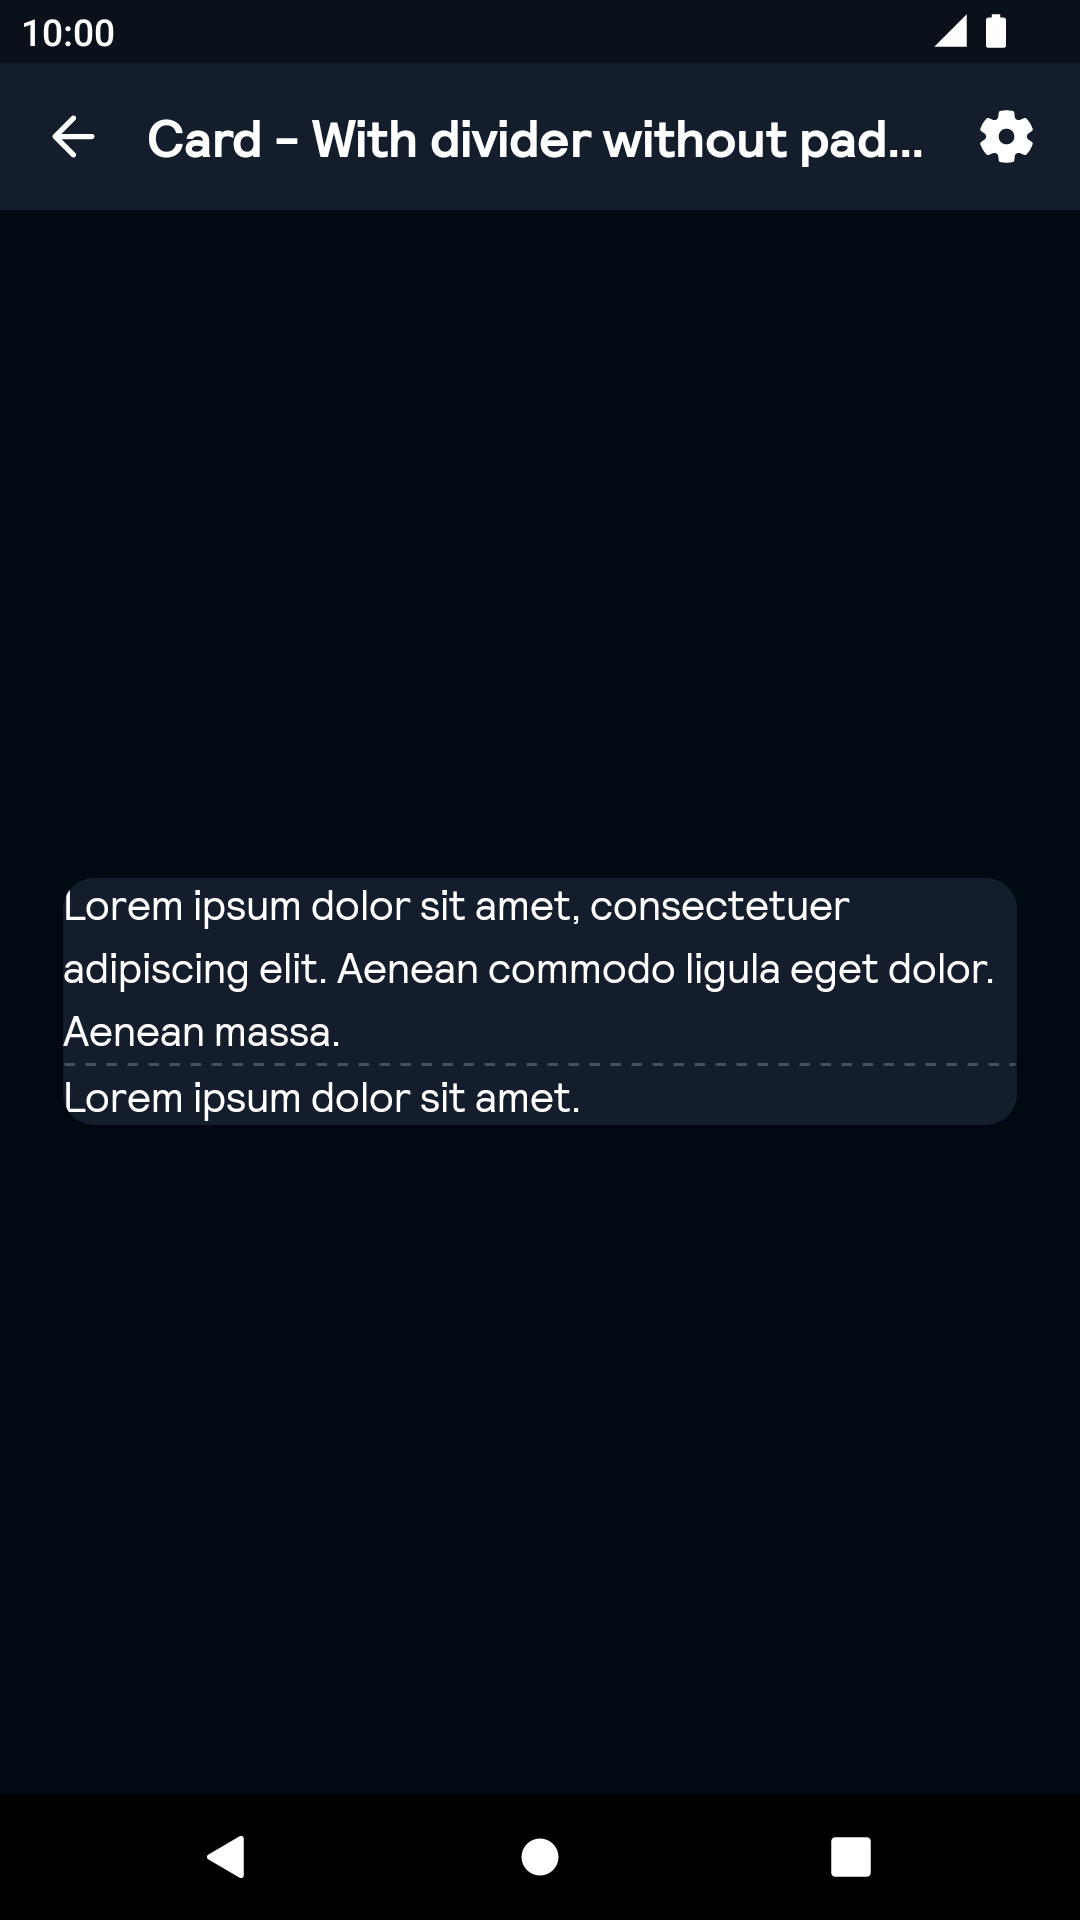 With divider without padding Card component - dark mode